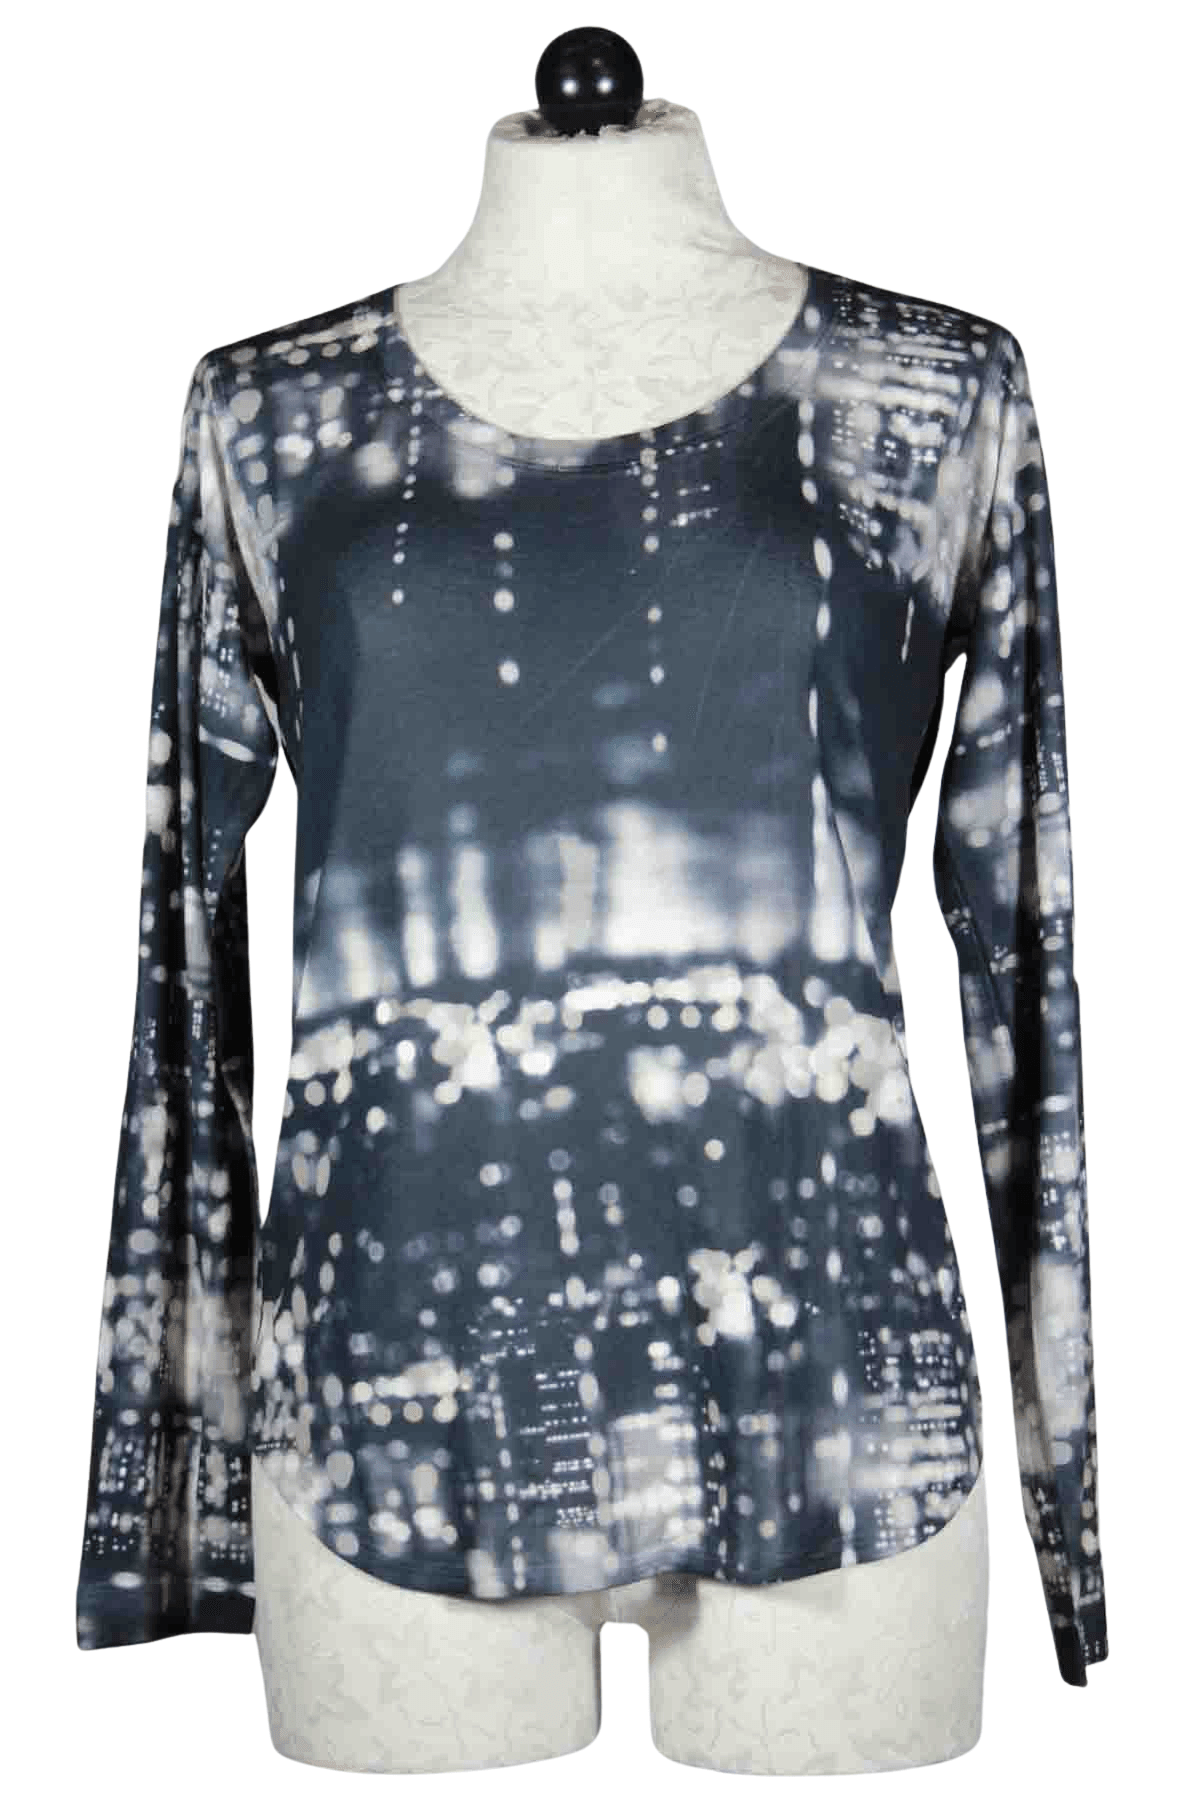 City Lights Long Sleeve Top by Nally and Millie 